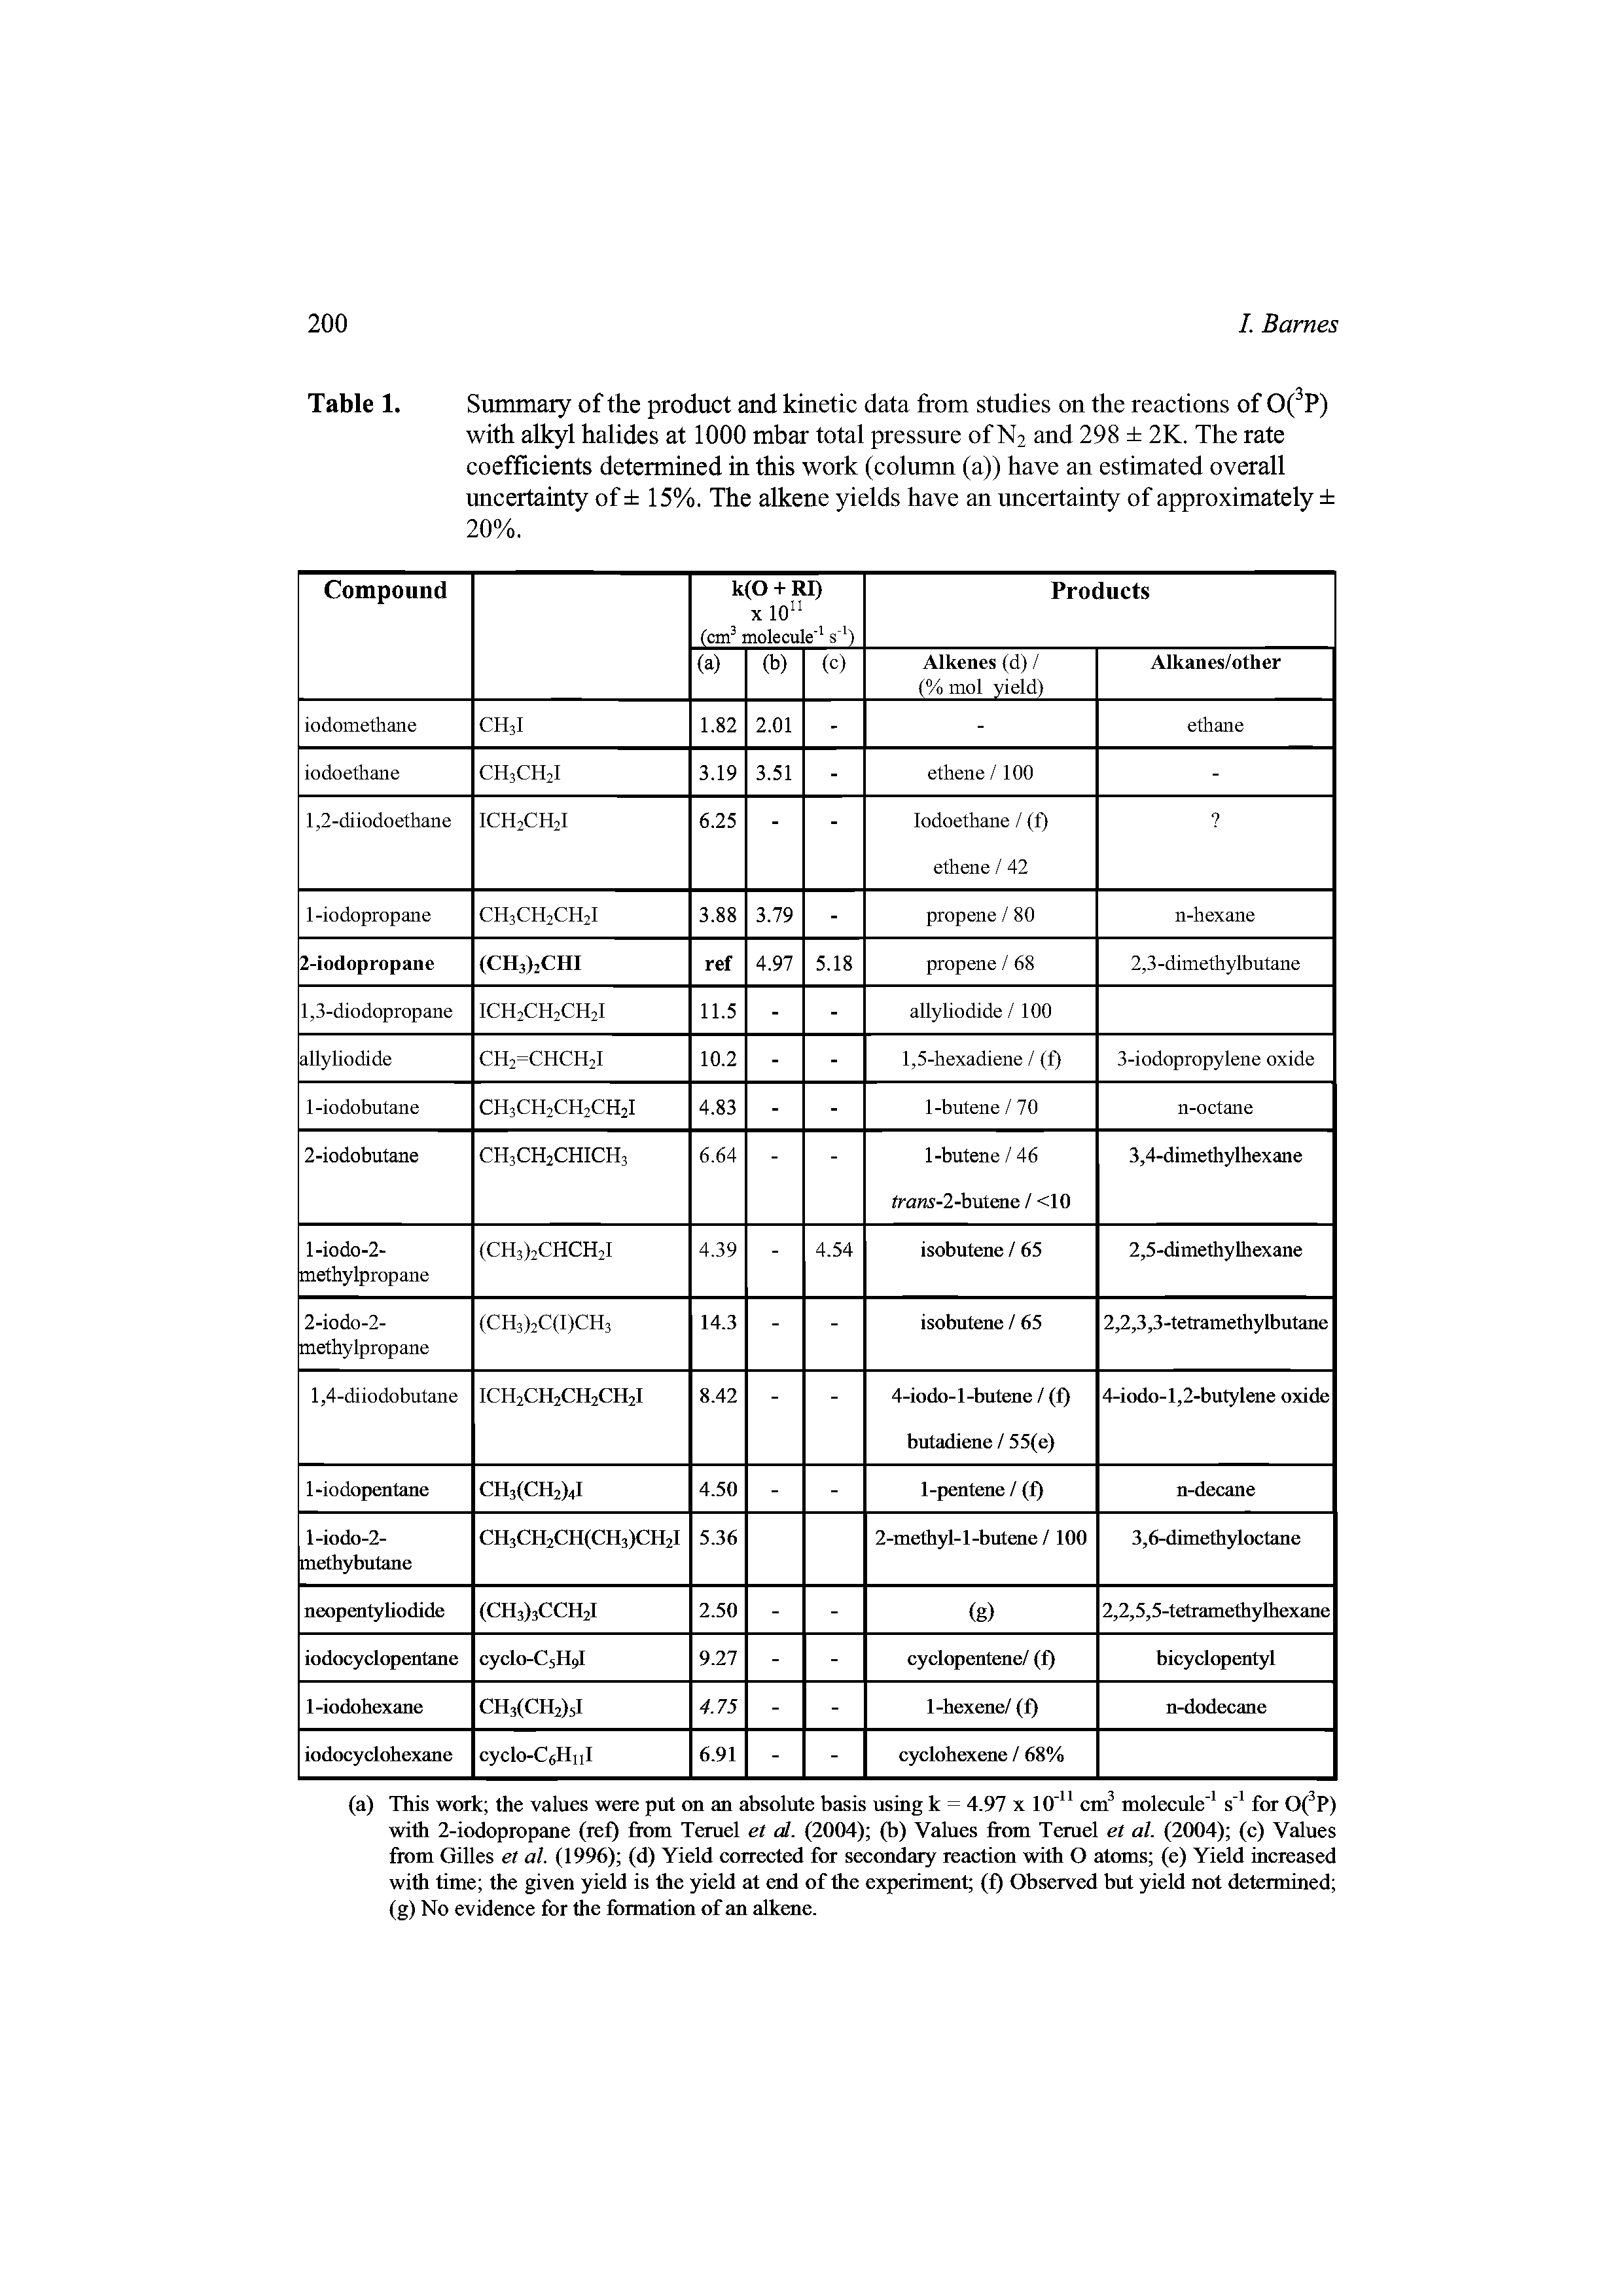 Table 1. Summary of the product and kinetic data from studies on the reactions of 0( P) with alkyl halides at 1000 mbar total pressure of N2 and 298 2K. The rate coefficients determined in this work (column (a)) have an estimated overall uncertainty of 15%. The alkene yields have an uncertainty of approximately 20%.